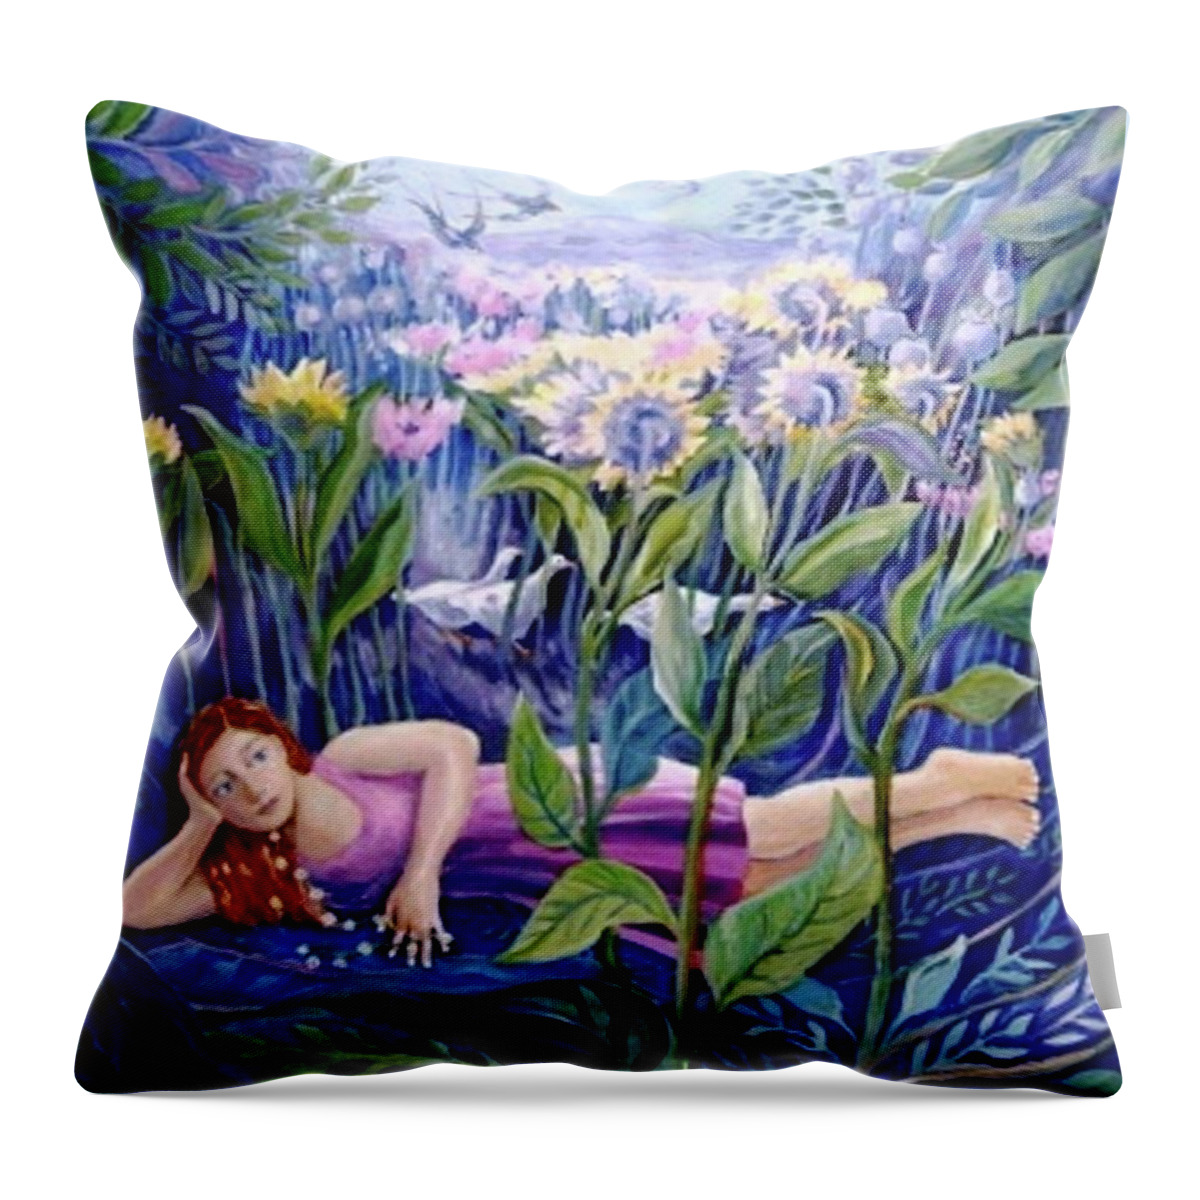 Daisy Chain Throw Pillow featuring the painting Daisy Chain by Trudi Doyle